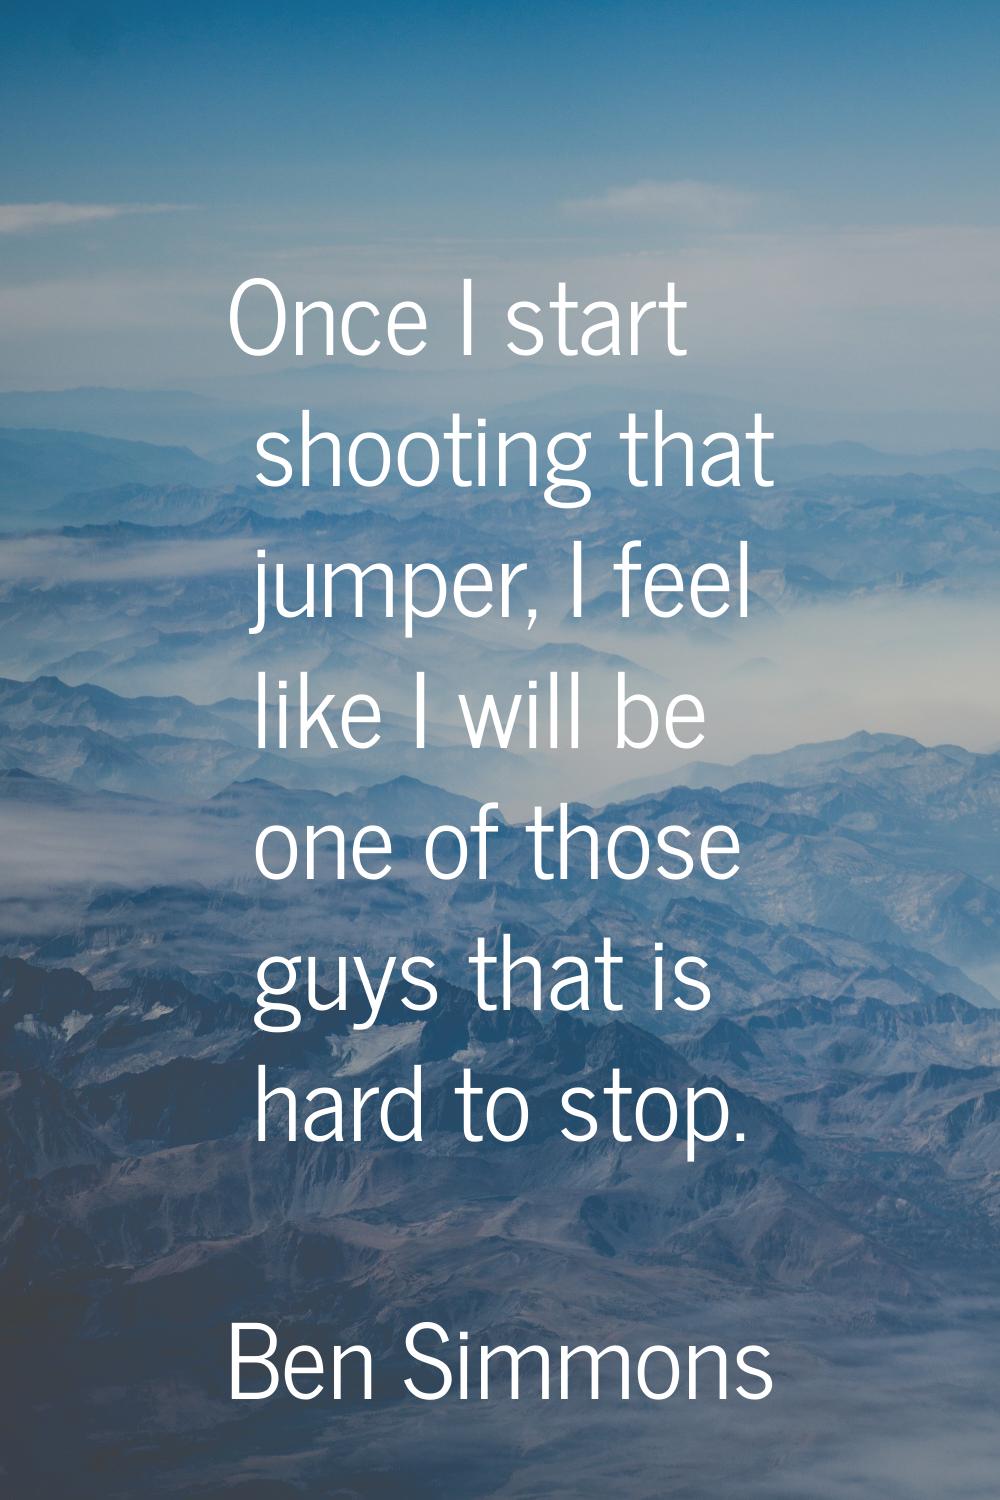 Once I start shooting that jumper, I feel like I will be one of those guys that is hard to stop.